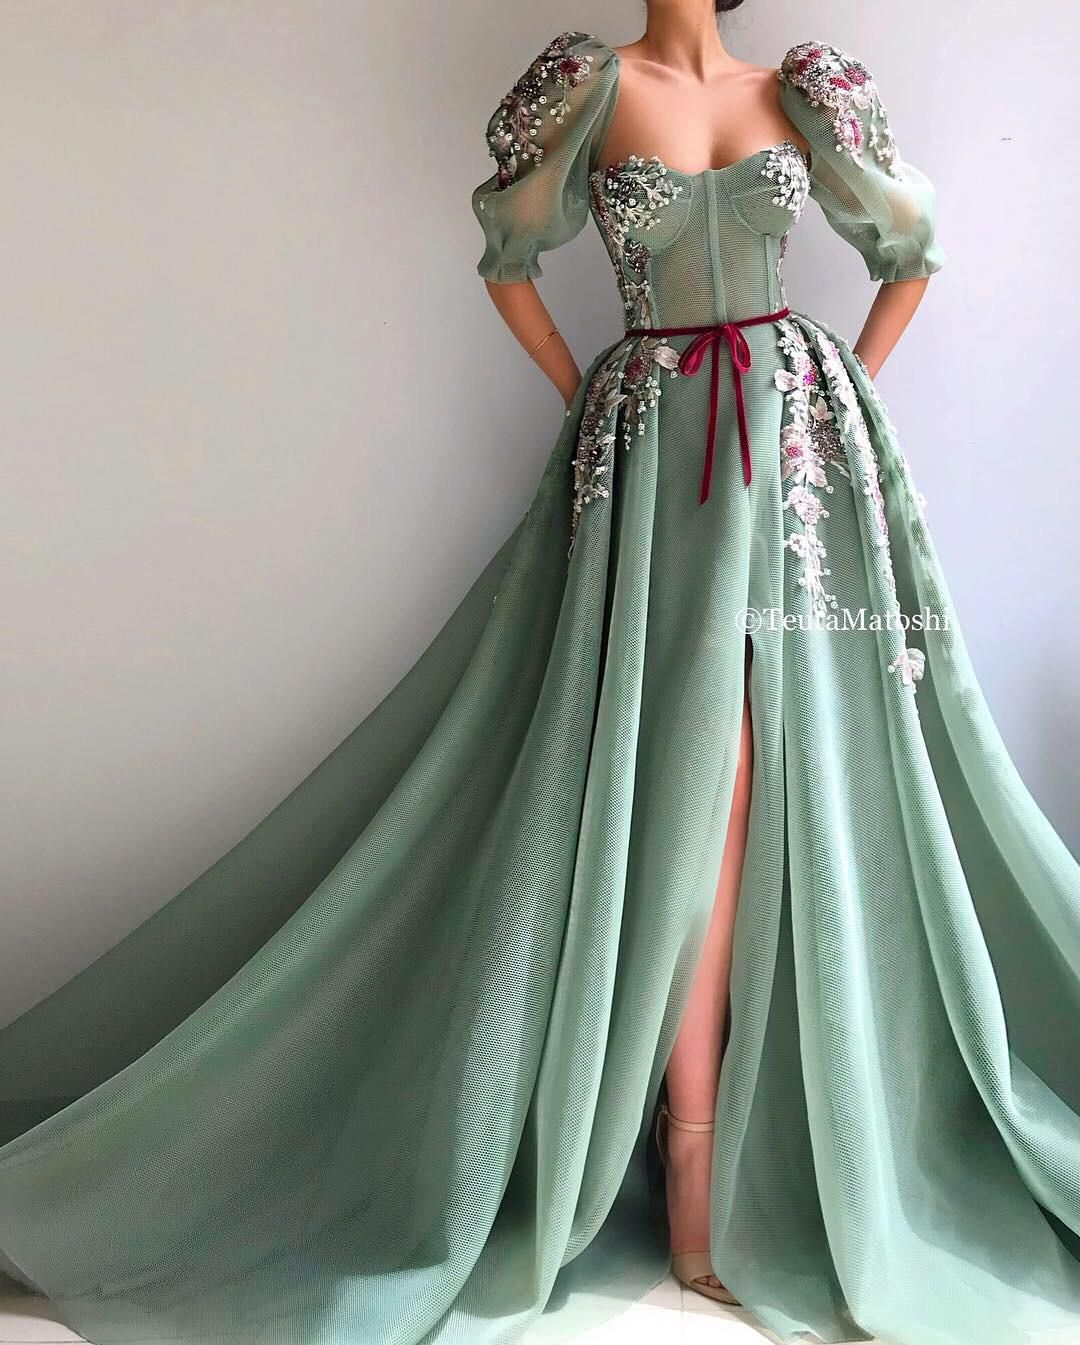 An Overview Of Turquoise Dresses